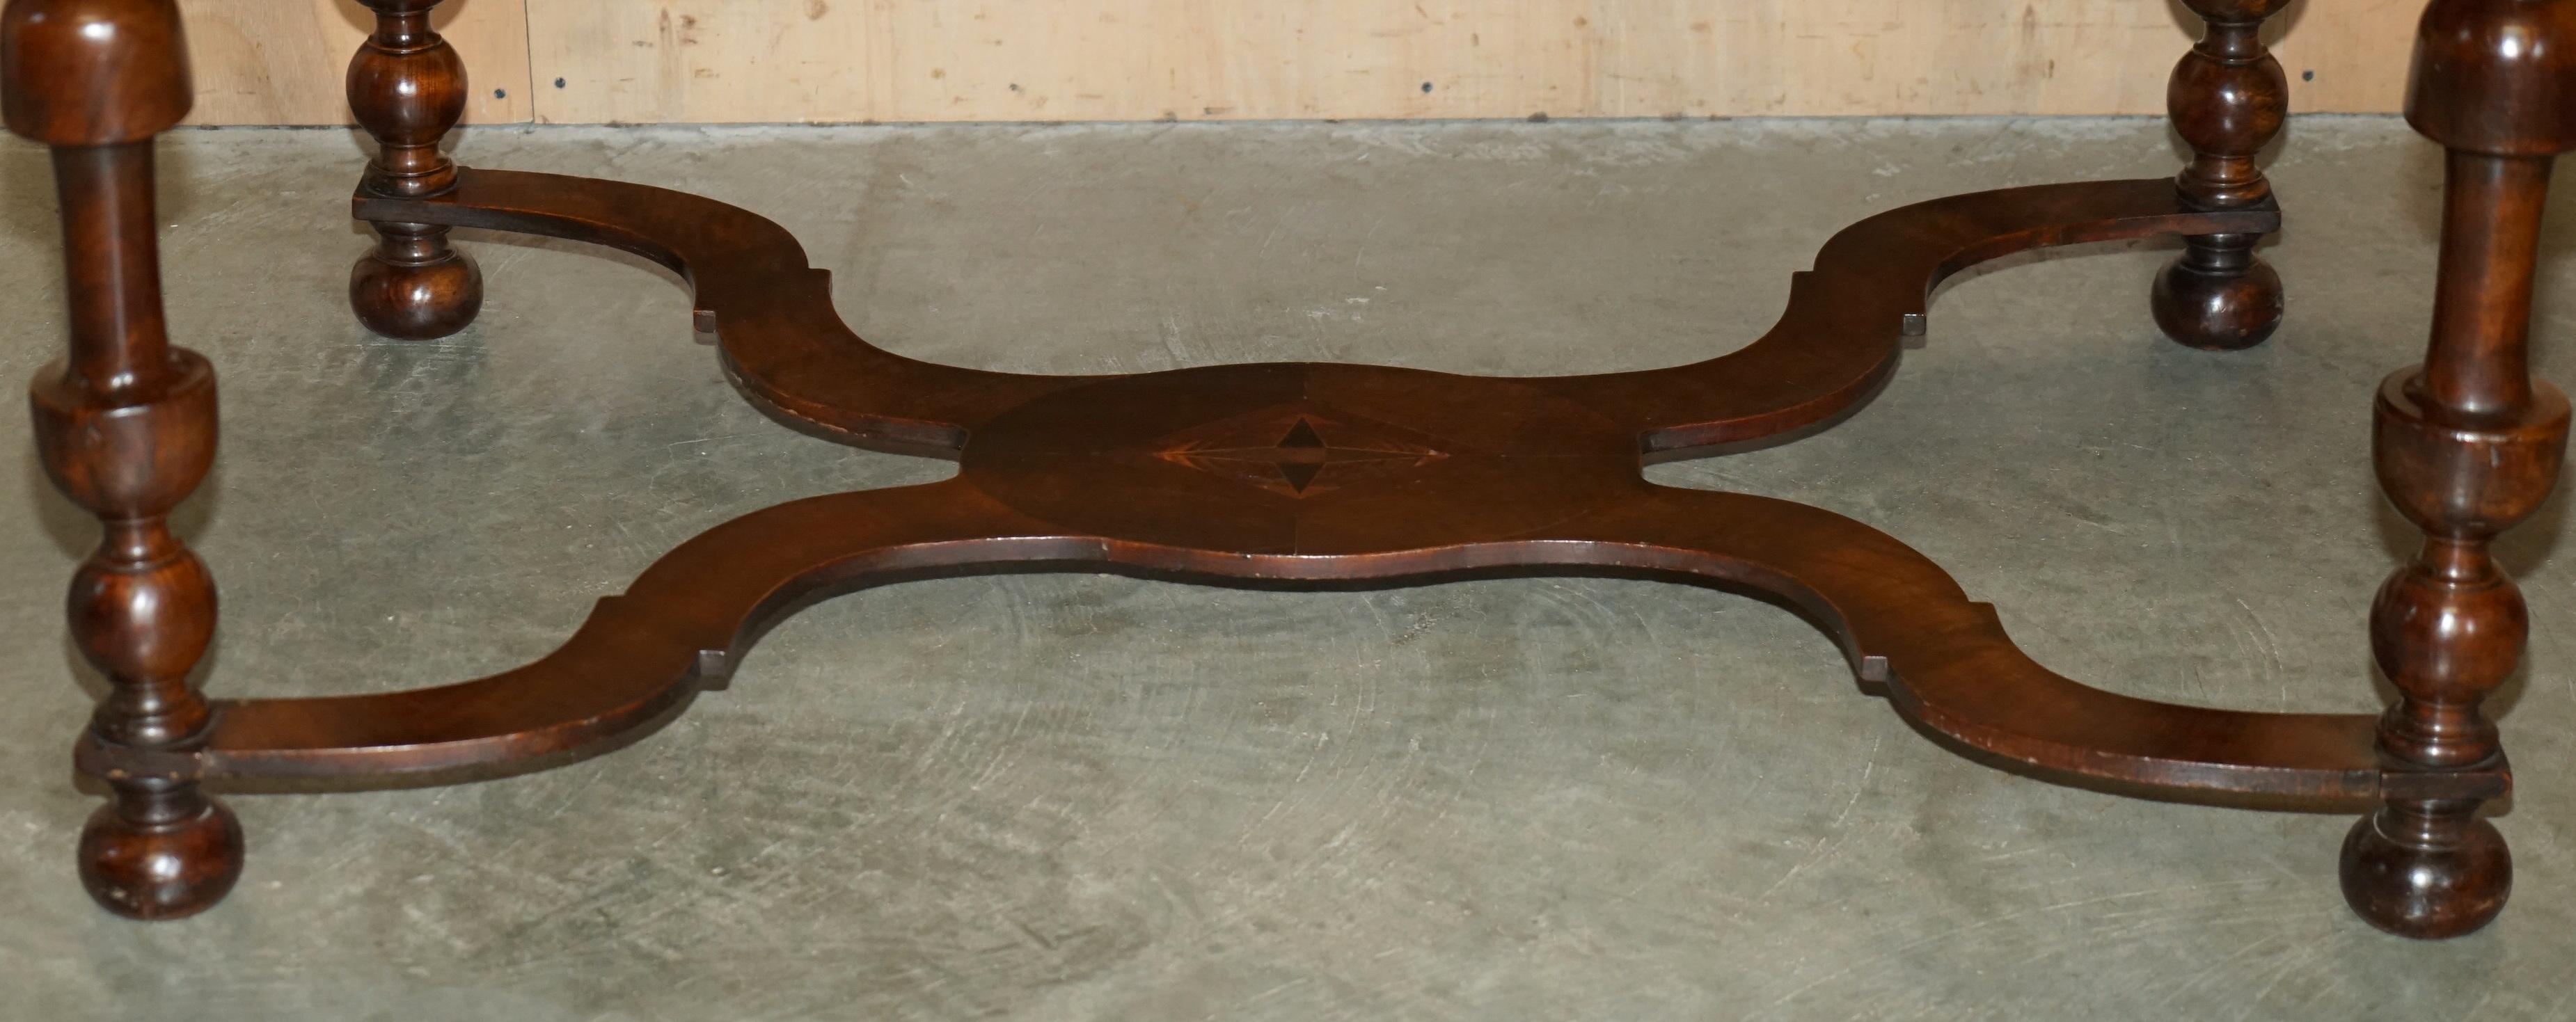 IMPORTANT WiLLIAM & MARY FULLY RESTORED OYSTER LABURNUM WOOD CENTRE TABLE For Sale 8